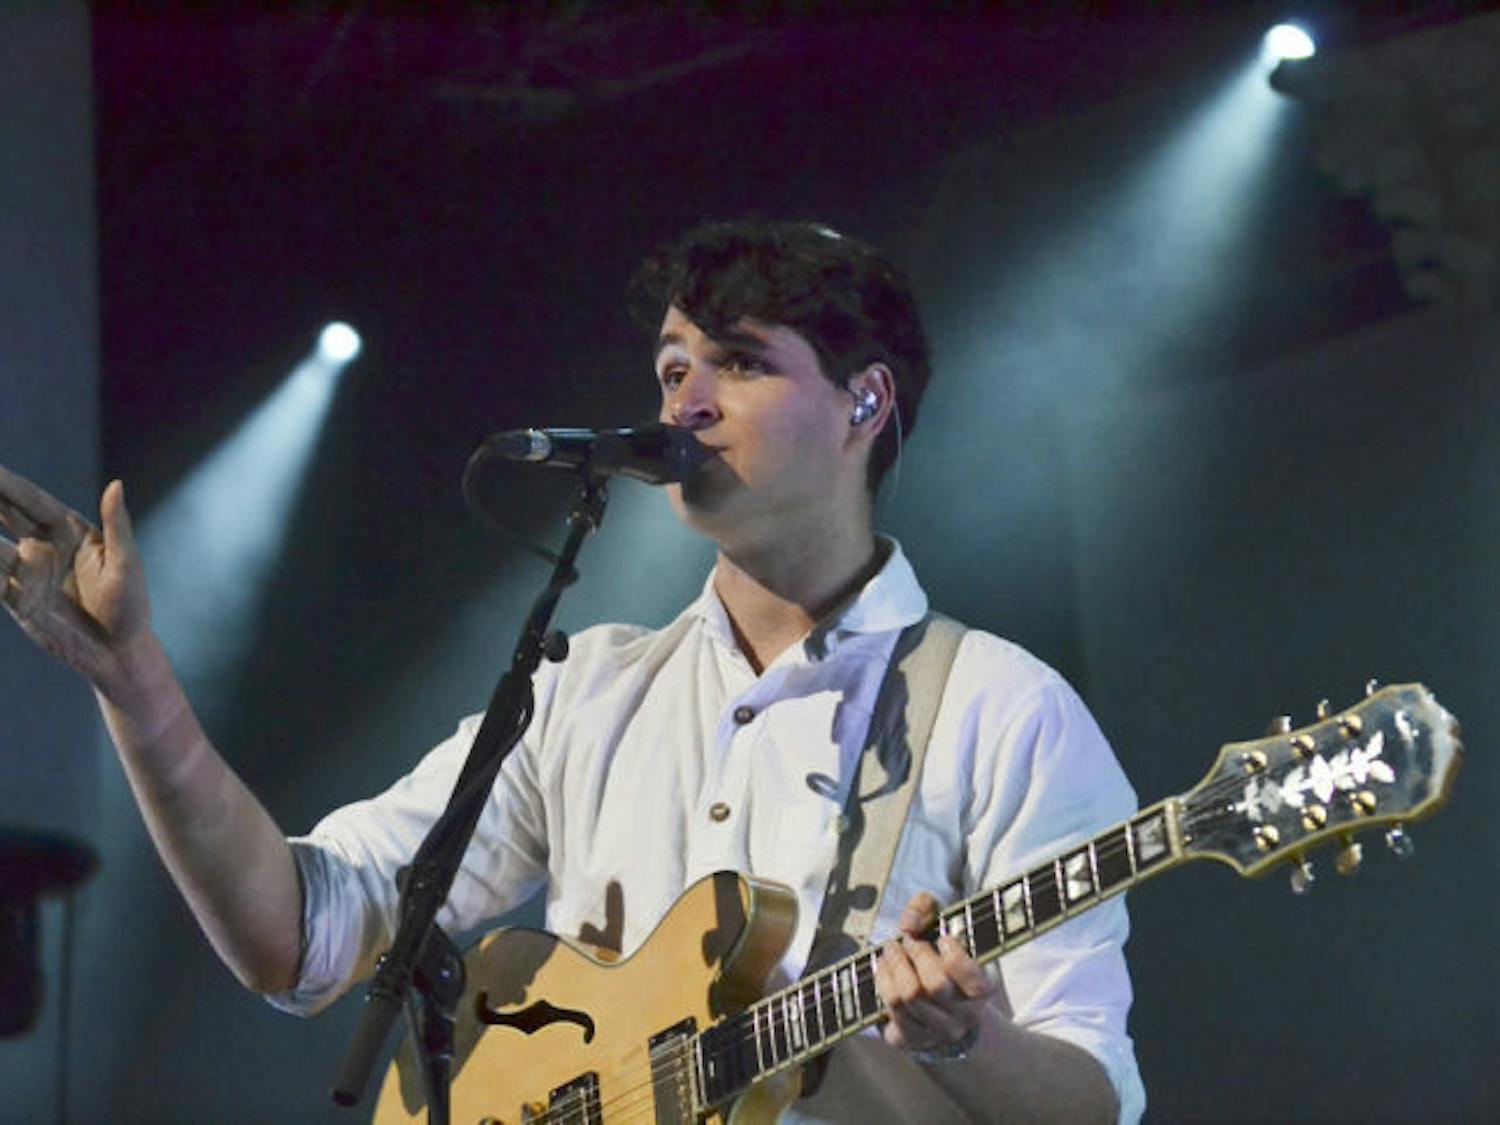 Vampire Weekend brought their distinctive sound to the lineup at Big Guava.
&nbsp;